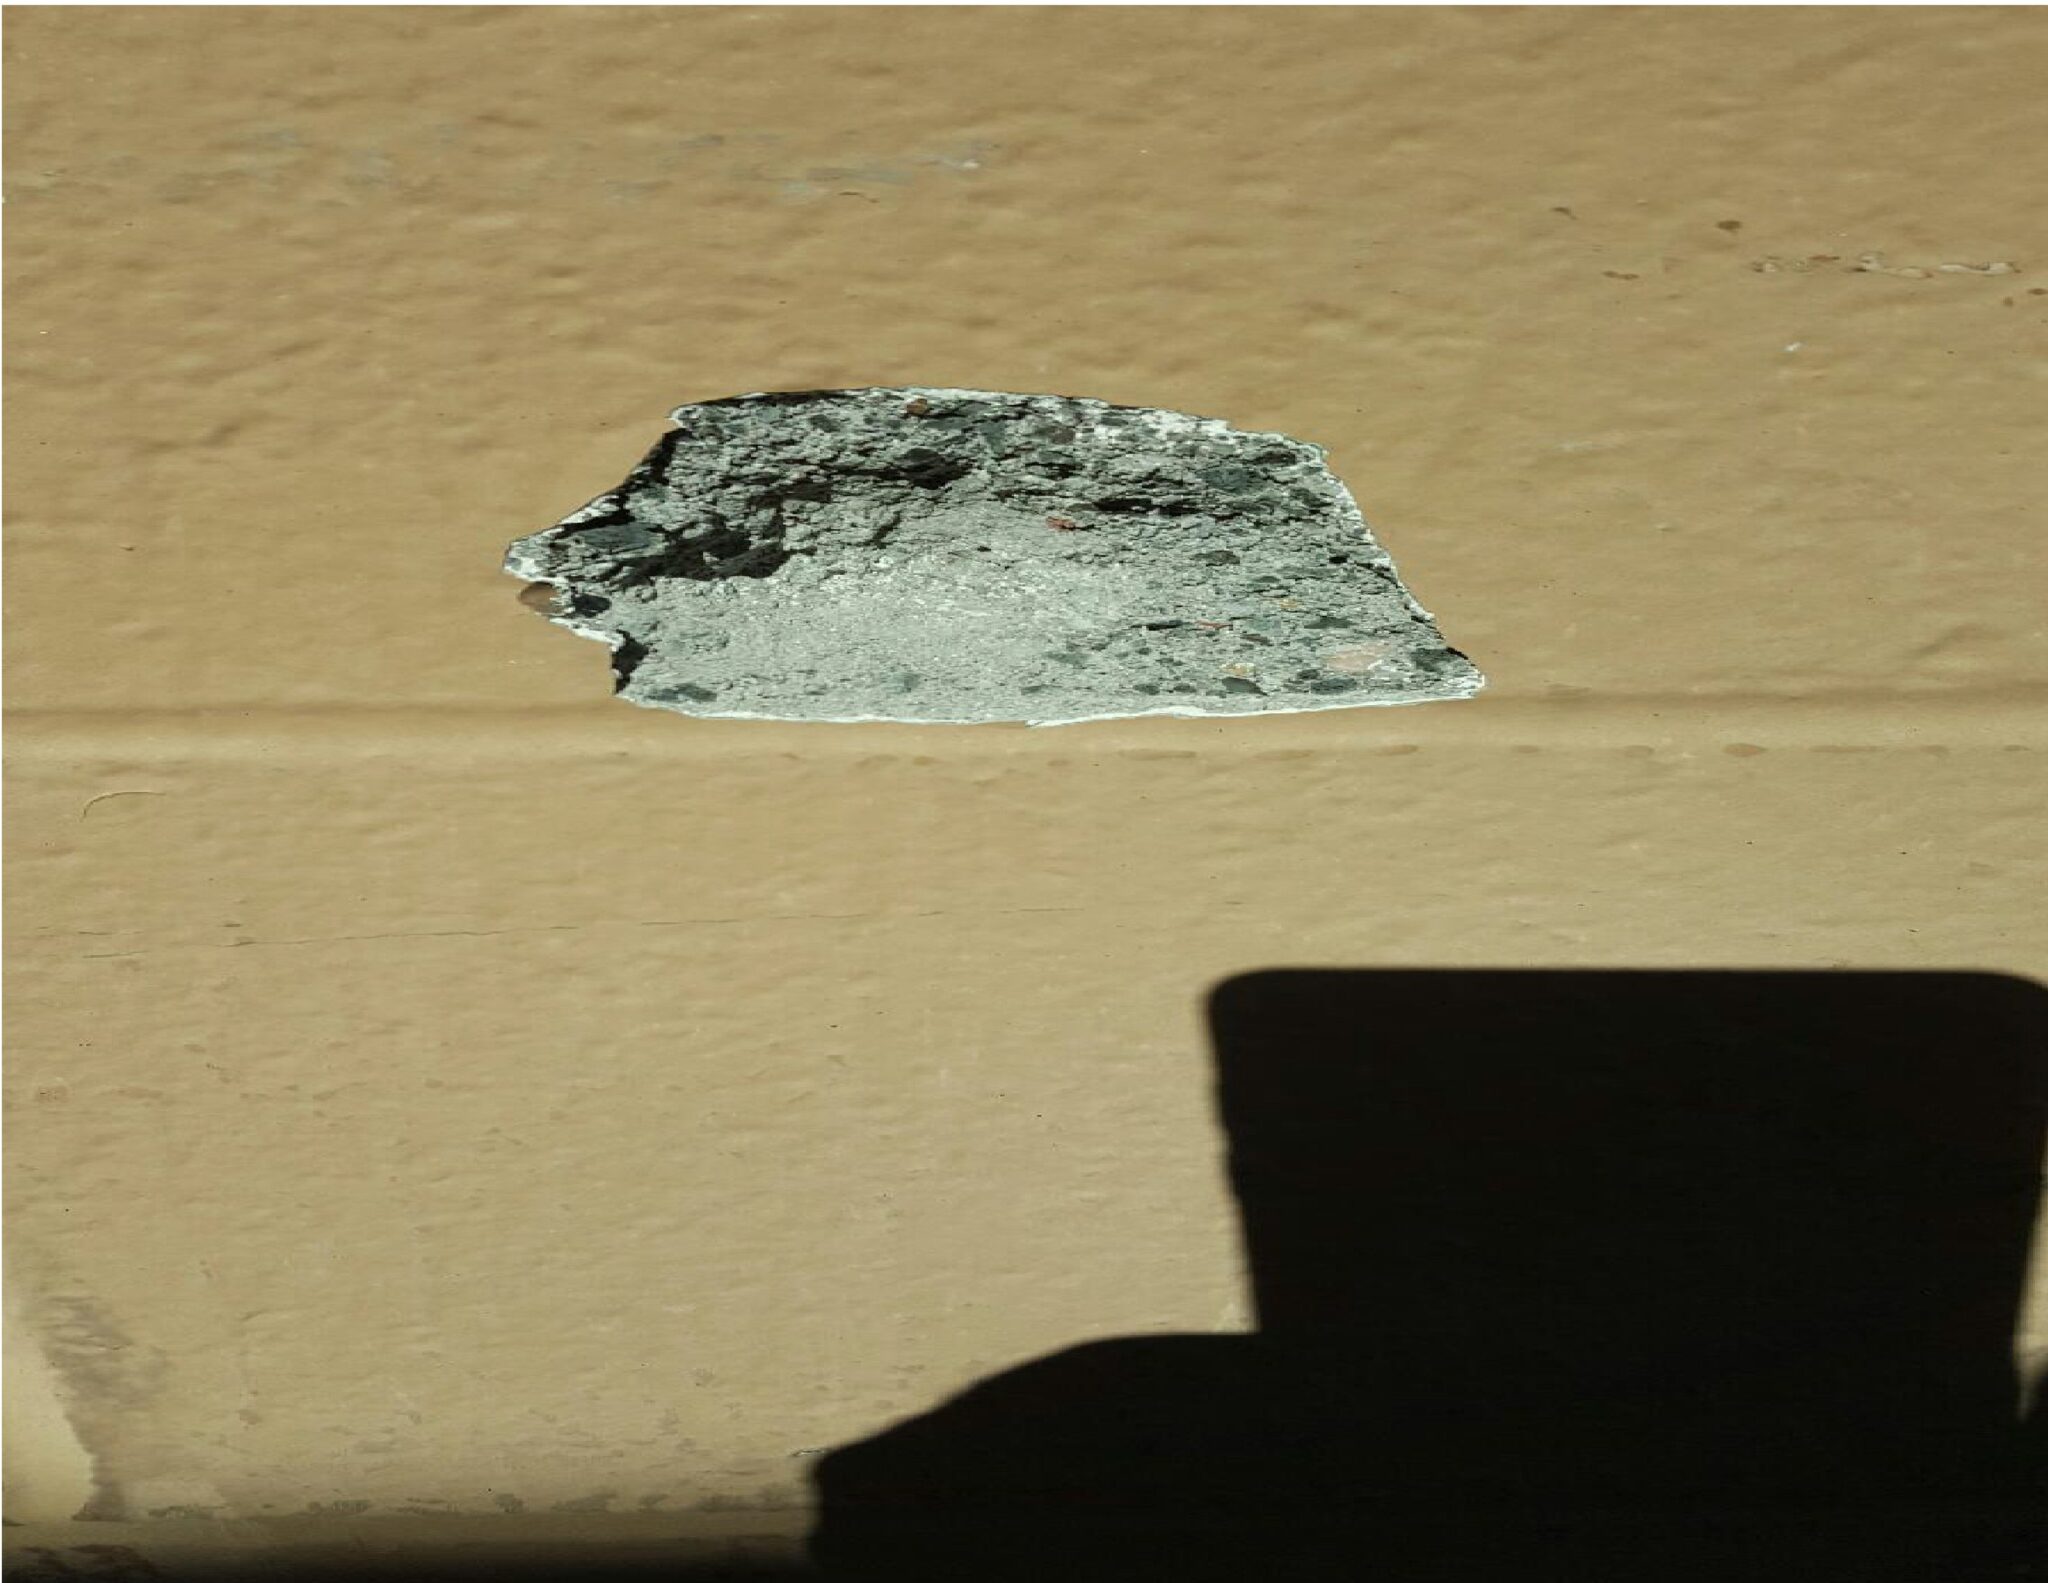 Pictured: A bullet also hit Walmart's building next to an emergency door exit.